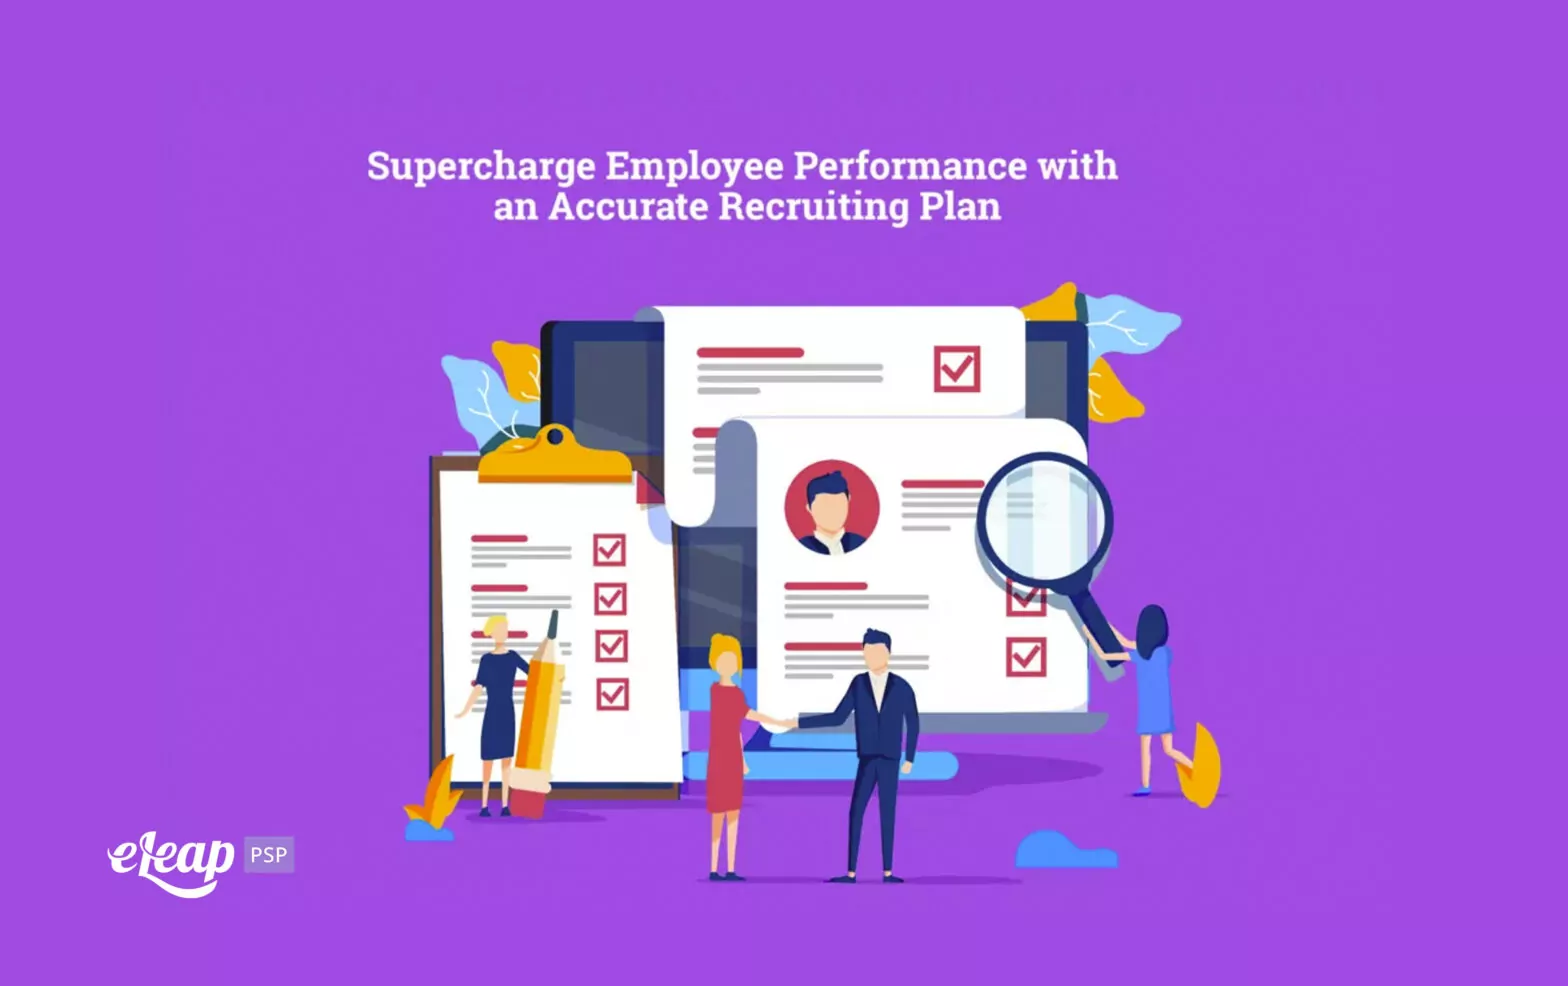 Supercharge Employee Performance with an Accurate Recruiting Plan